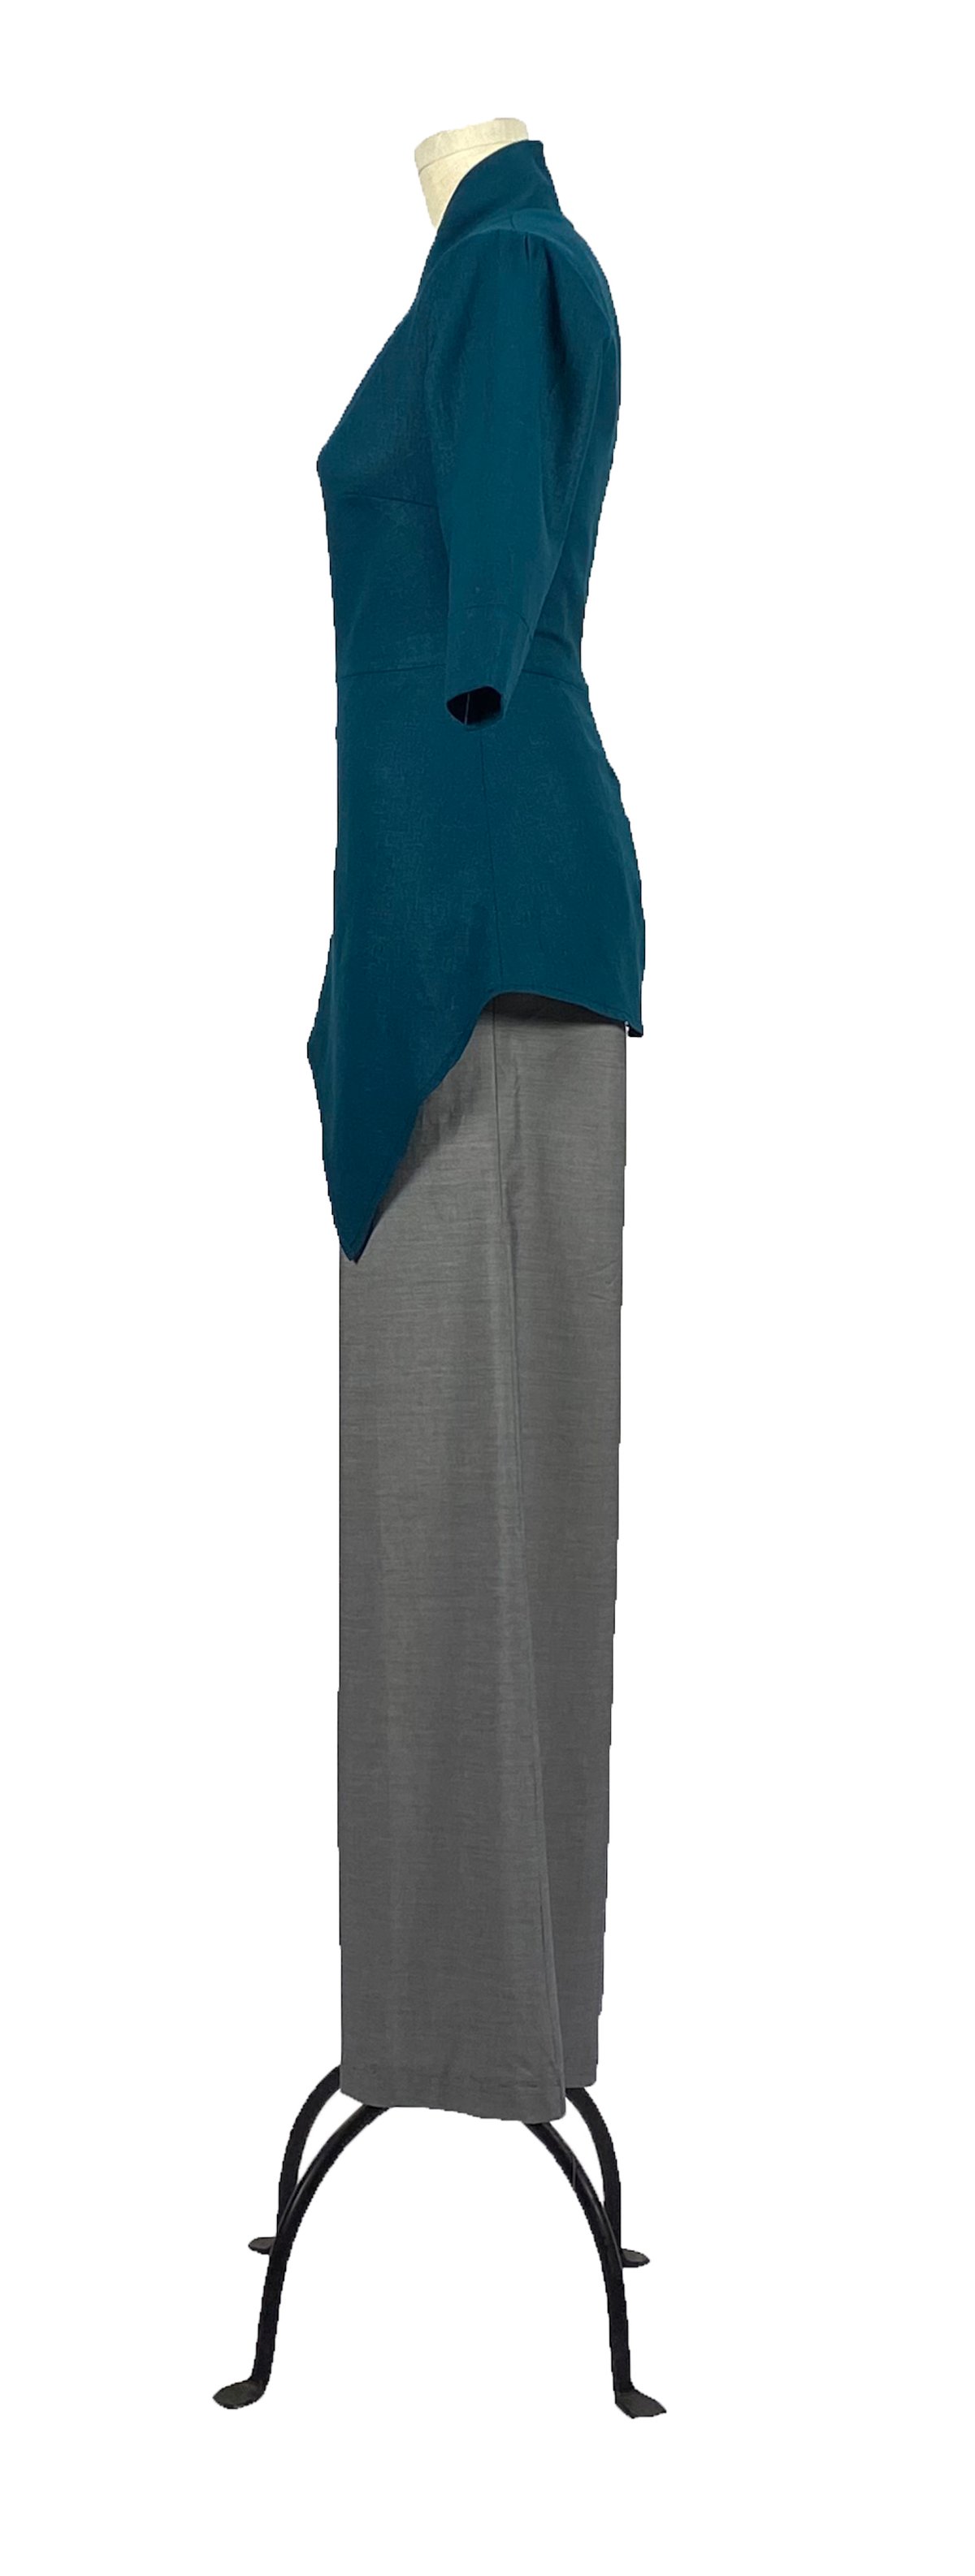 Image of Elmira Cromwell top in teal